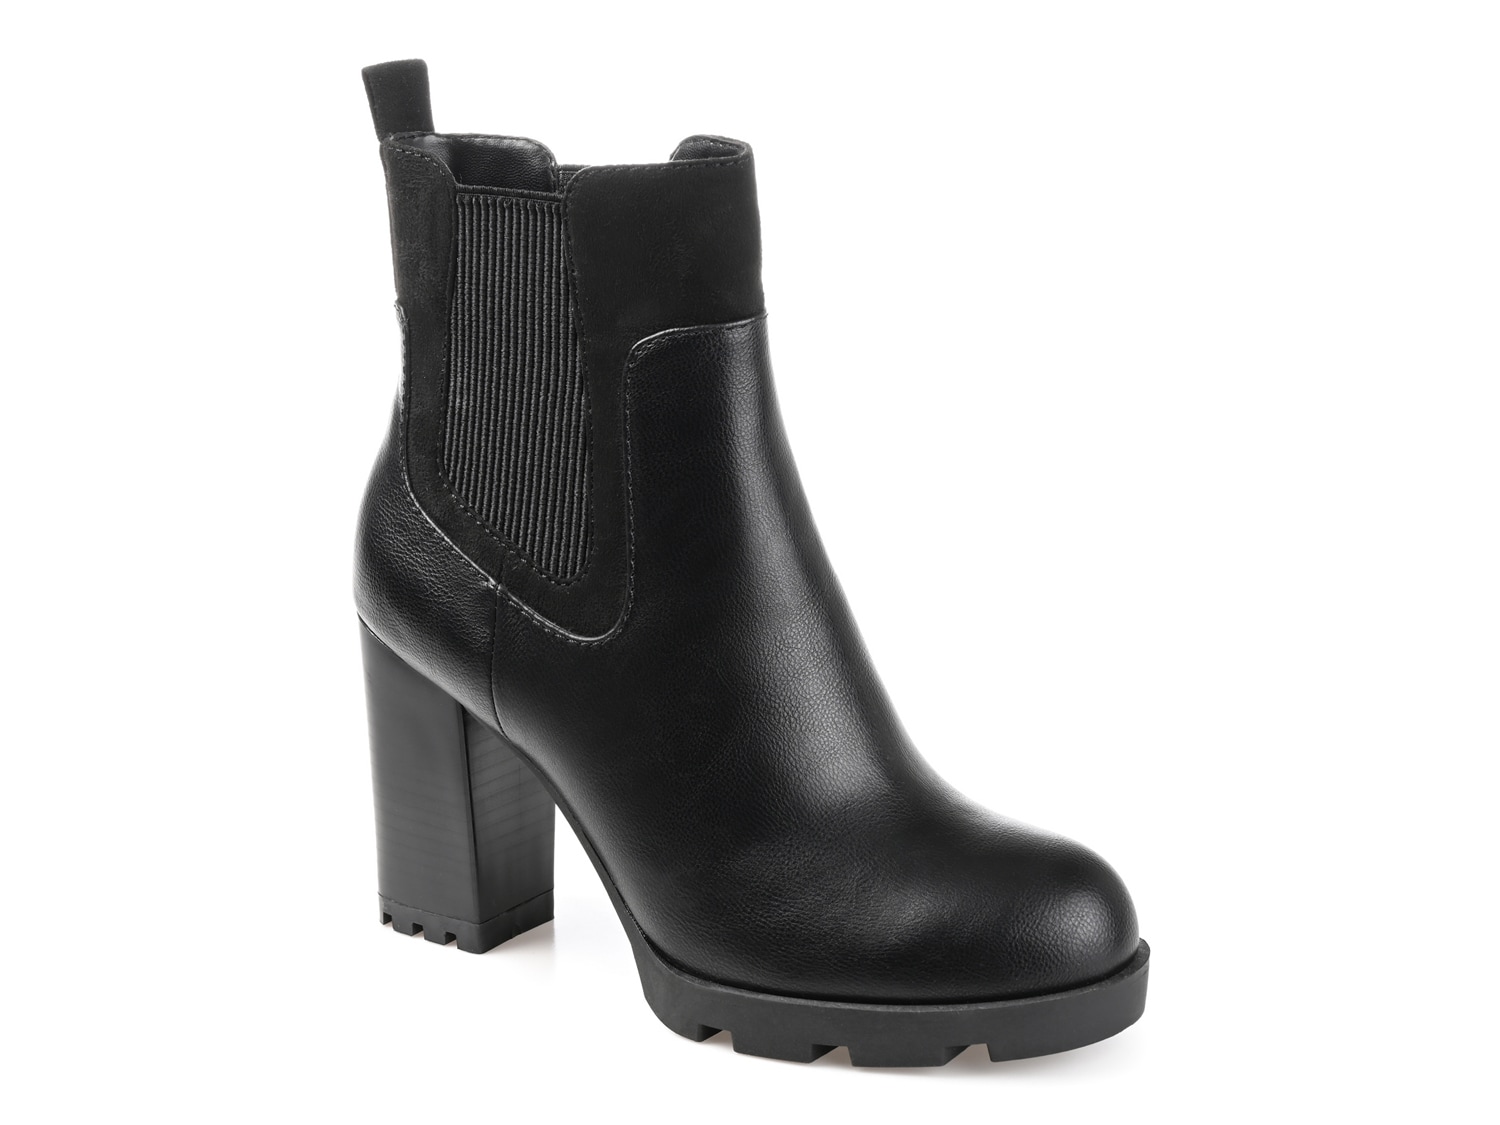 Journee Collection Islana Chelsea Boot - Free Shipping | DSW